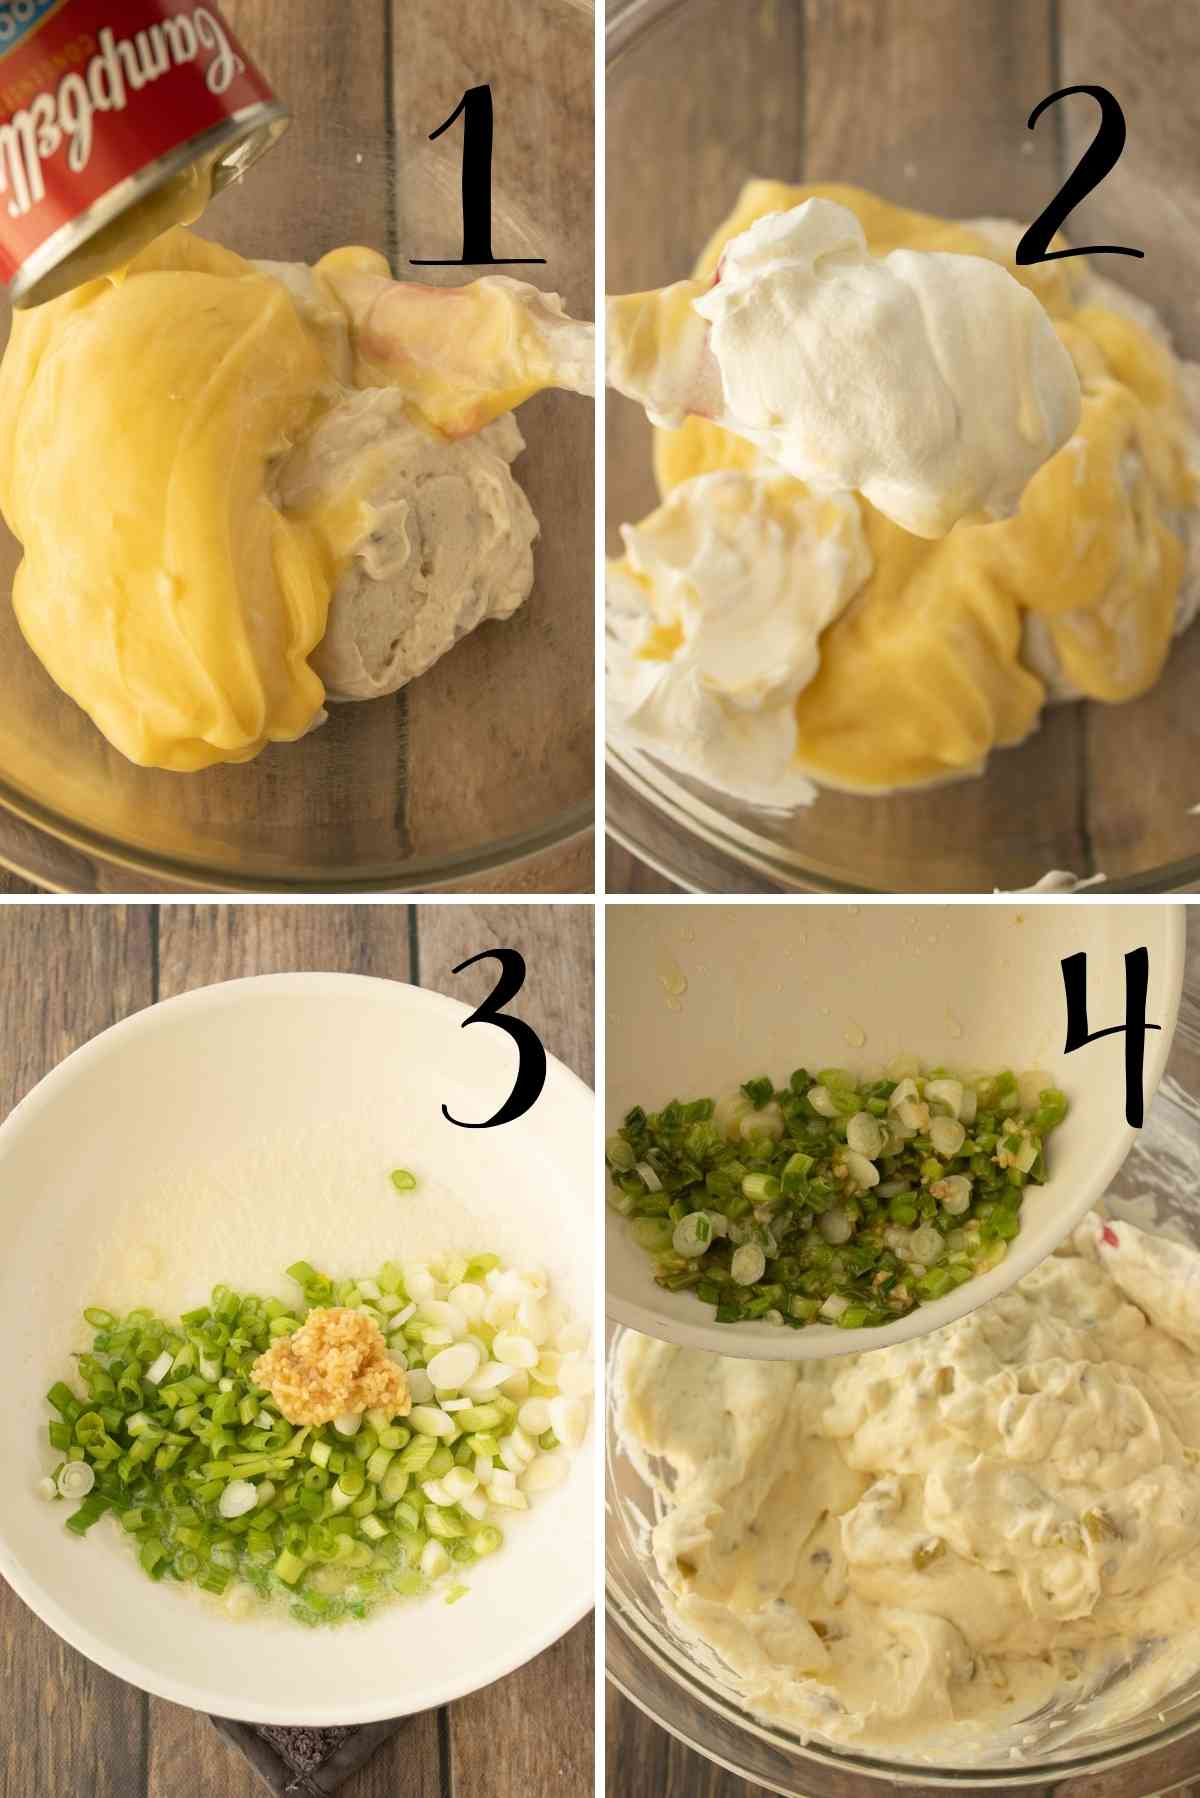 Prepare the creamy sauce to use in the chicken filling as well as the enchiladas topping.